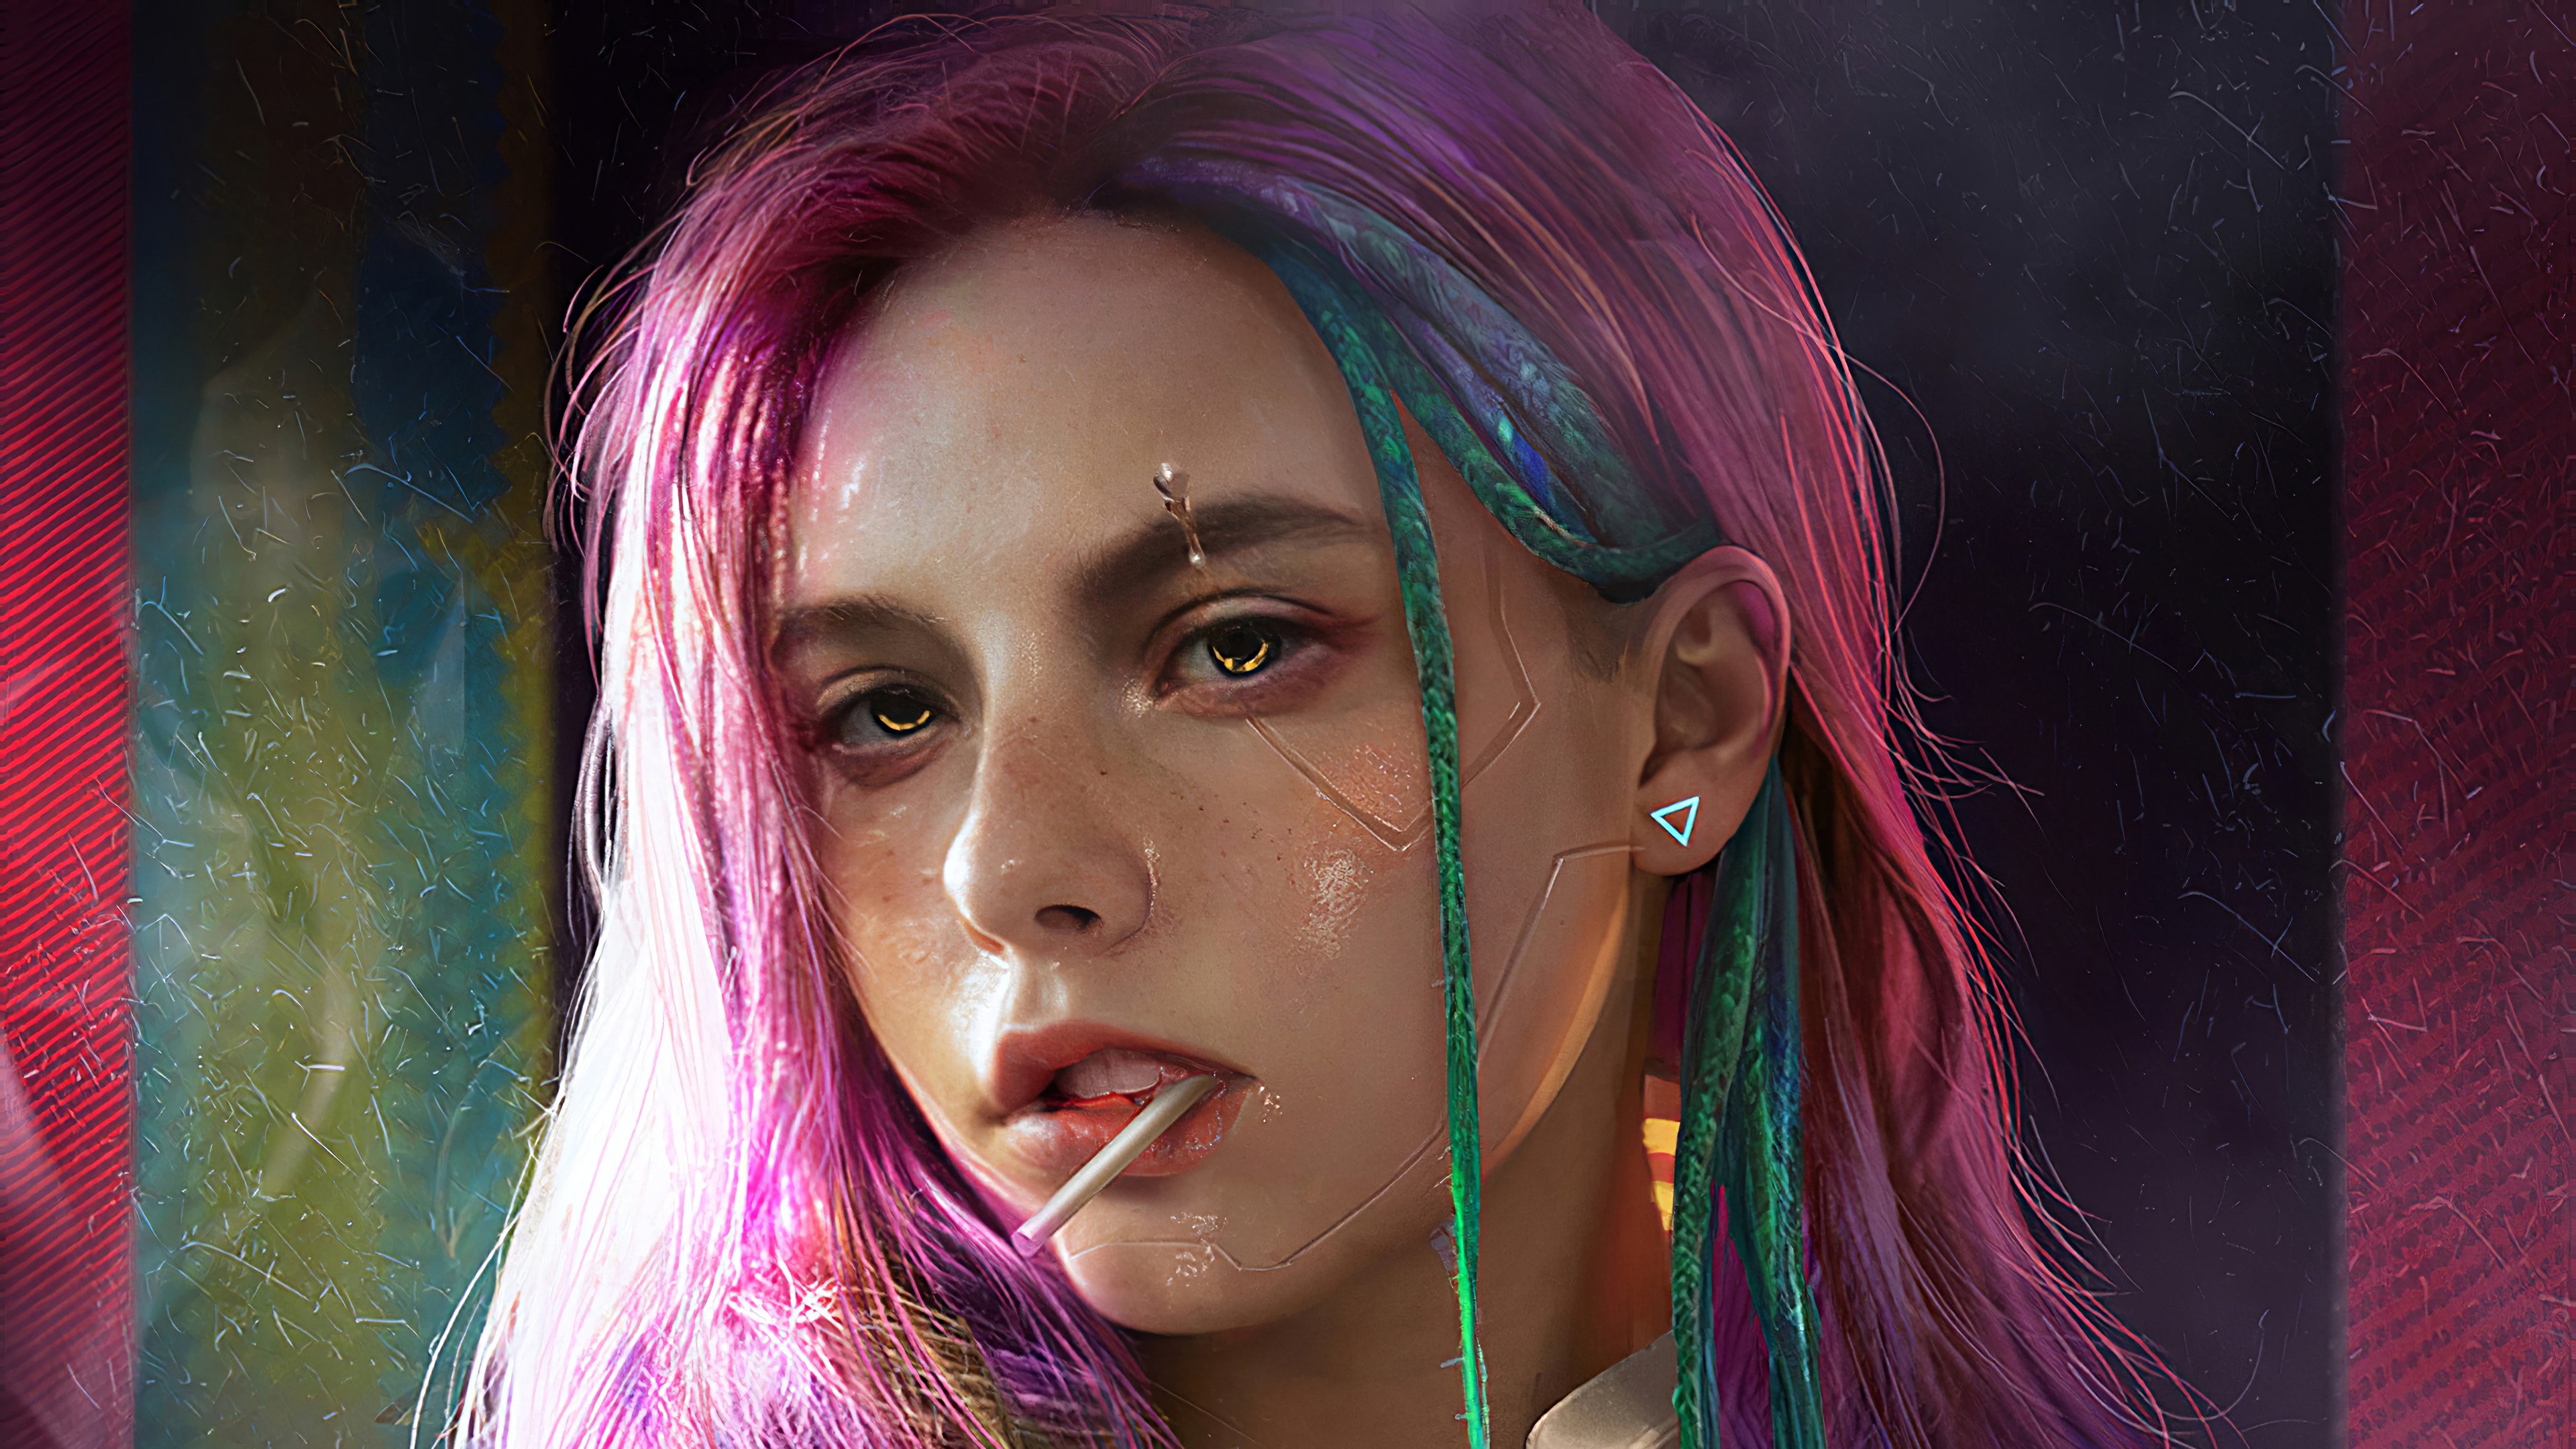 Wallpaper Girl with coloful hair Cyberpunk style